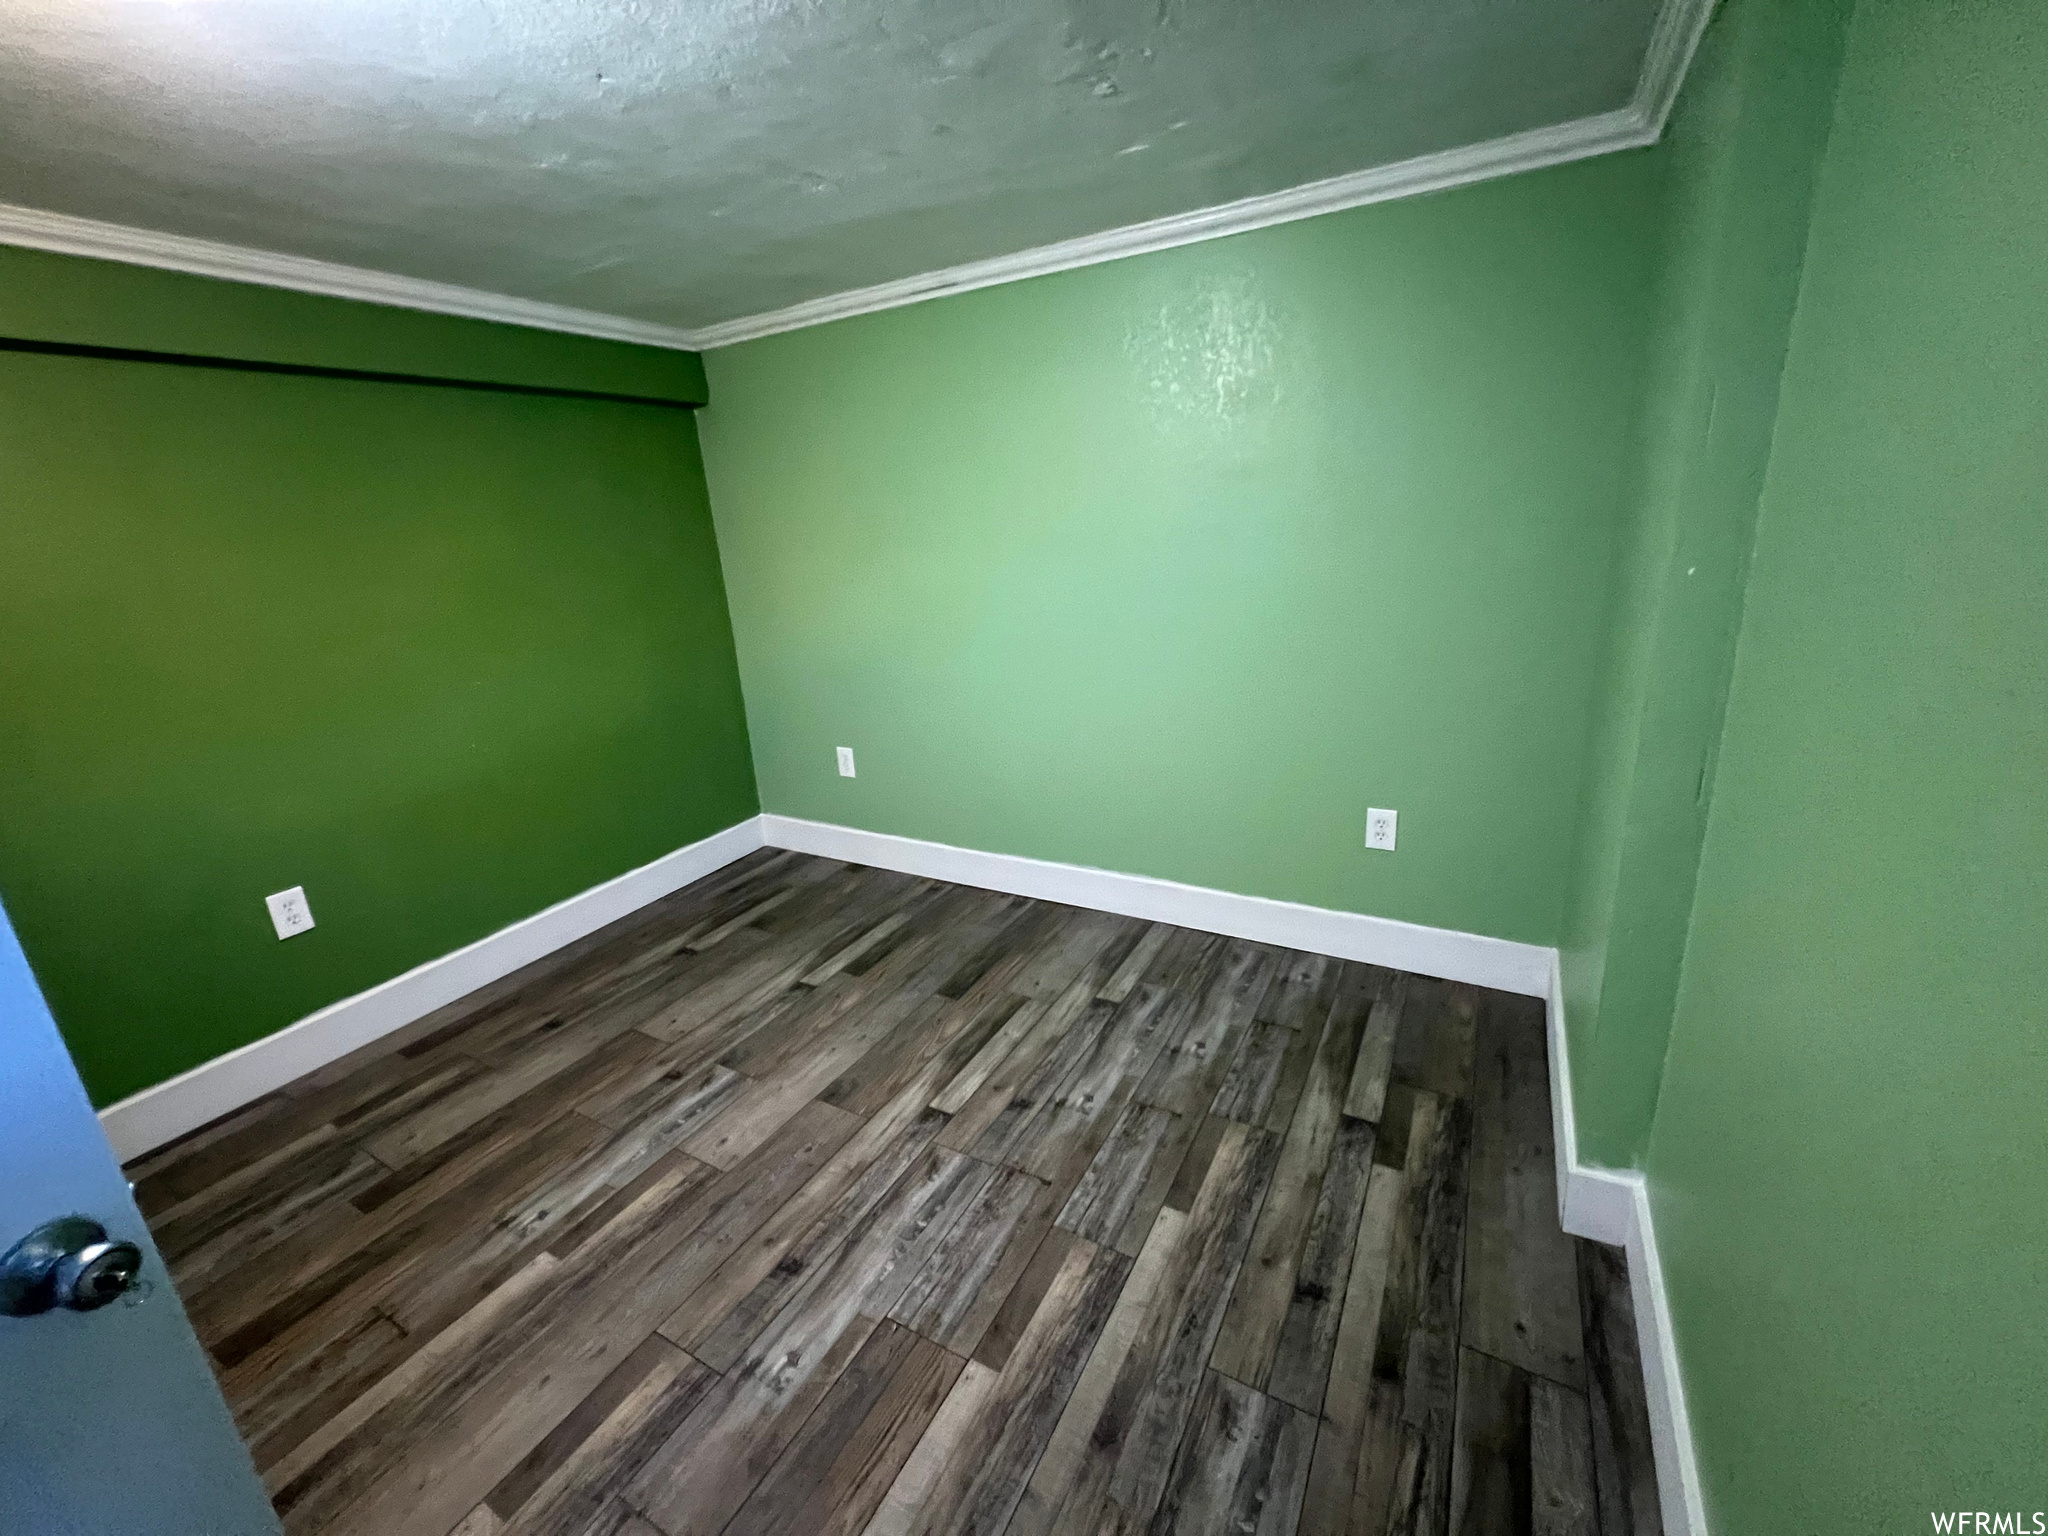 Spare room featuring a textured ceiling, crown molding, and dark Laminate flooring